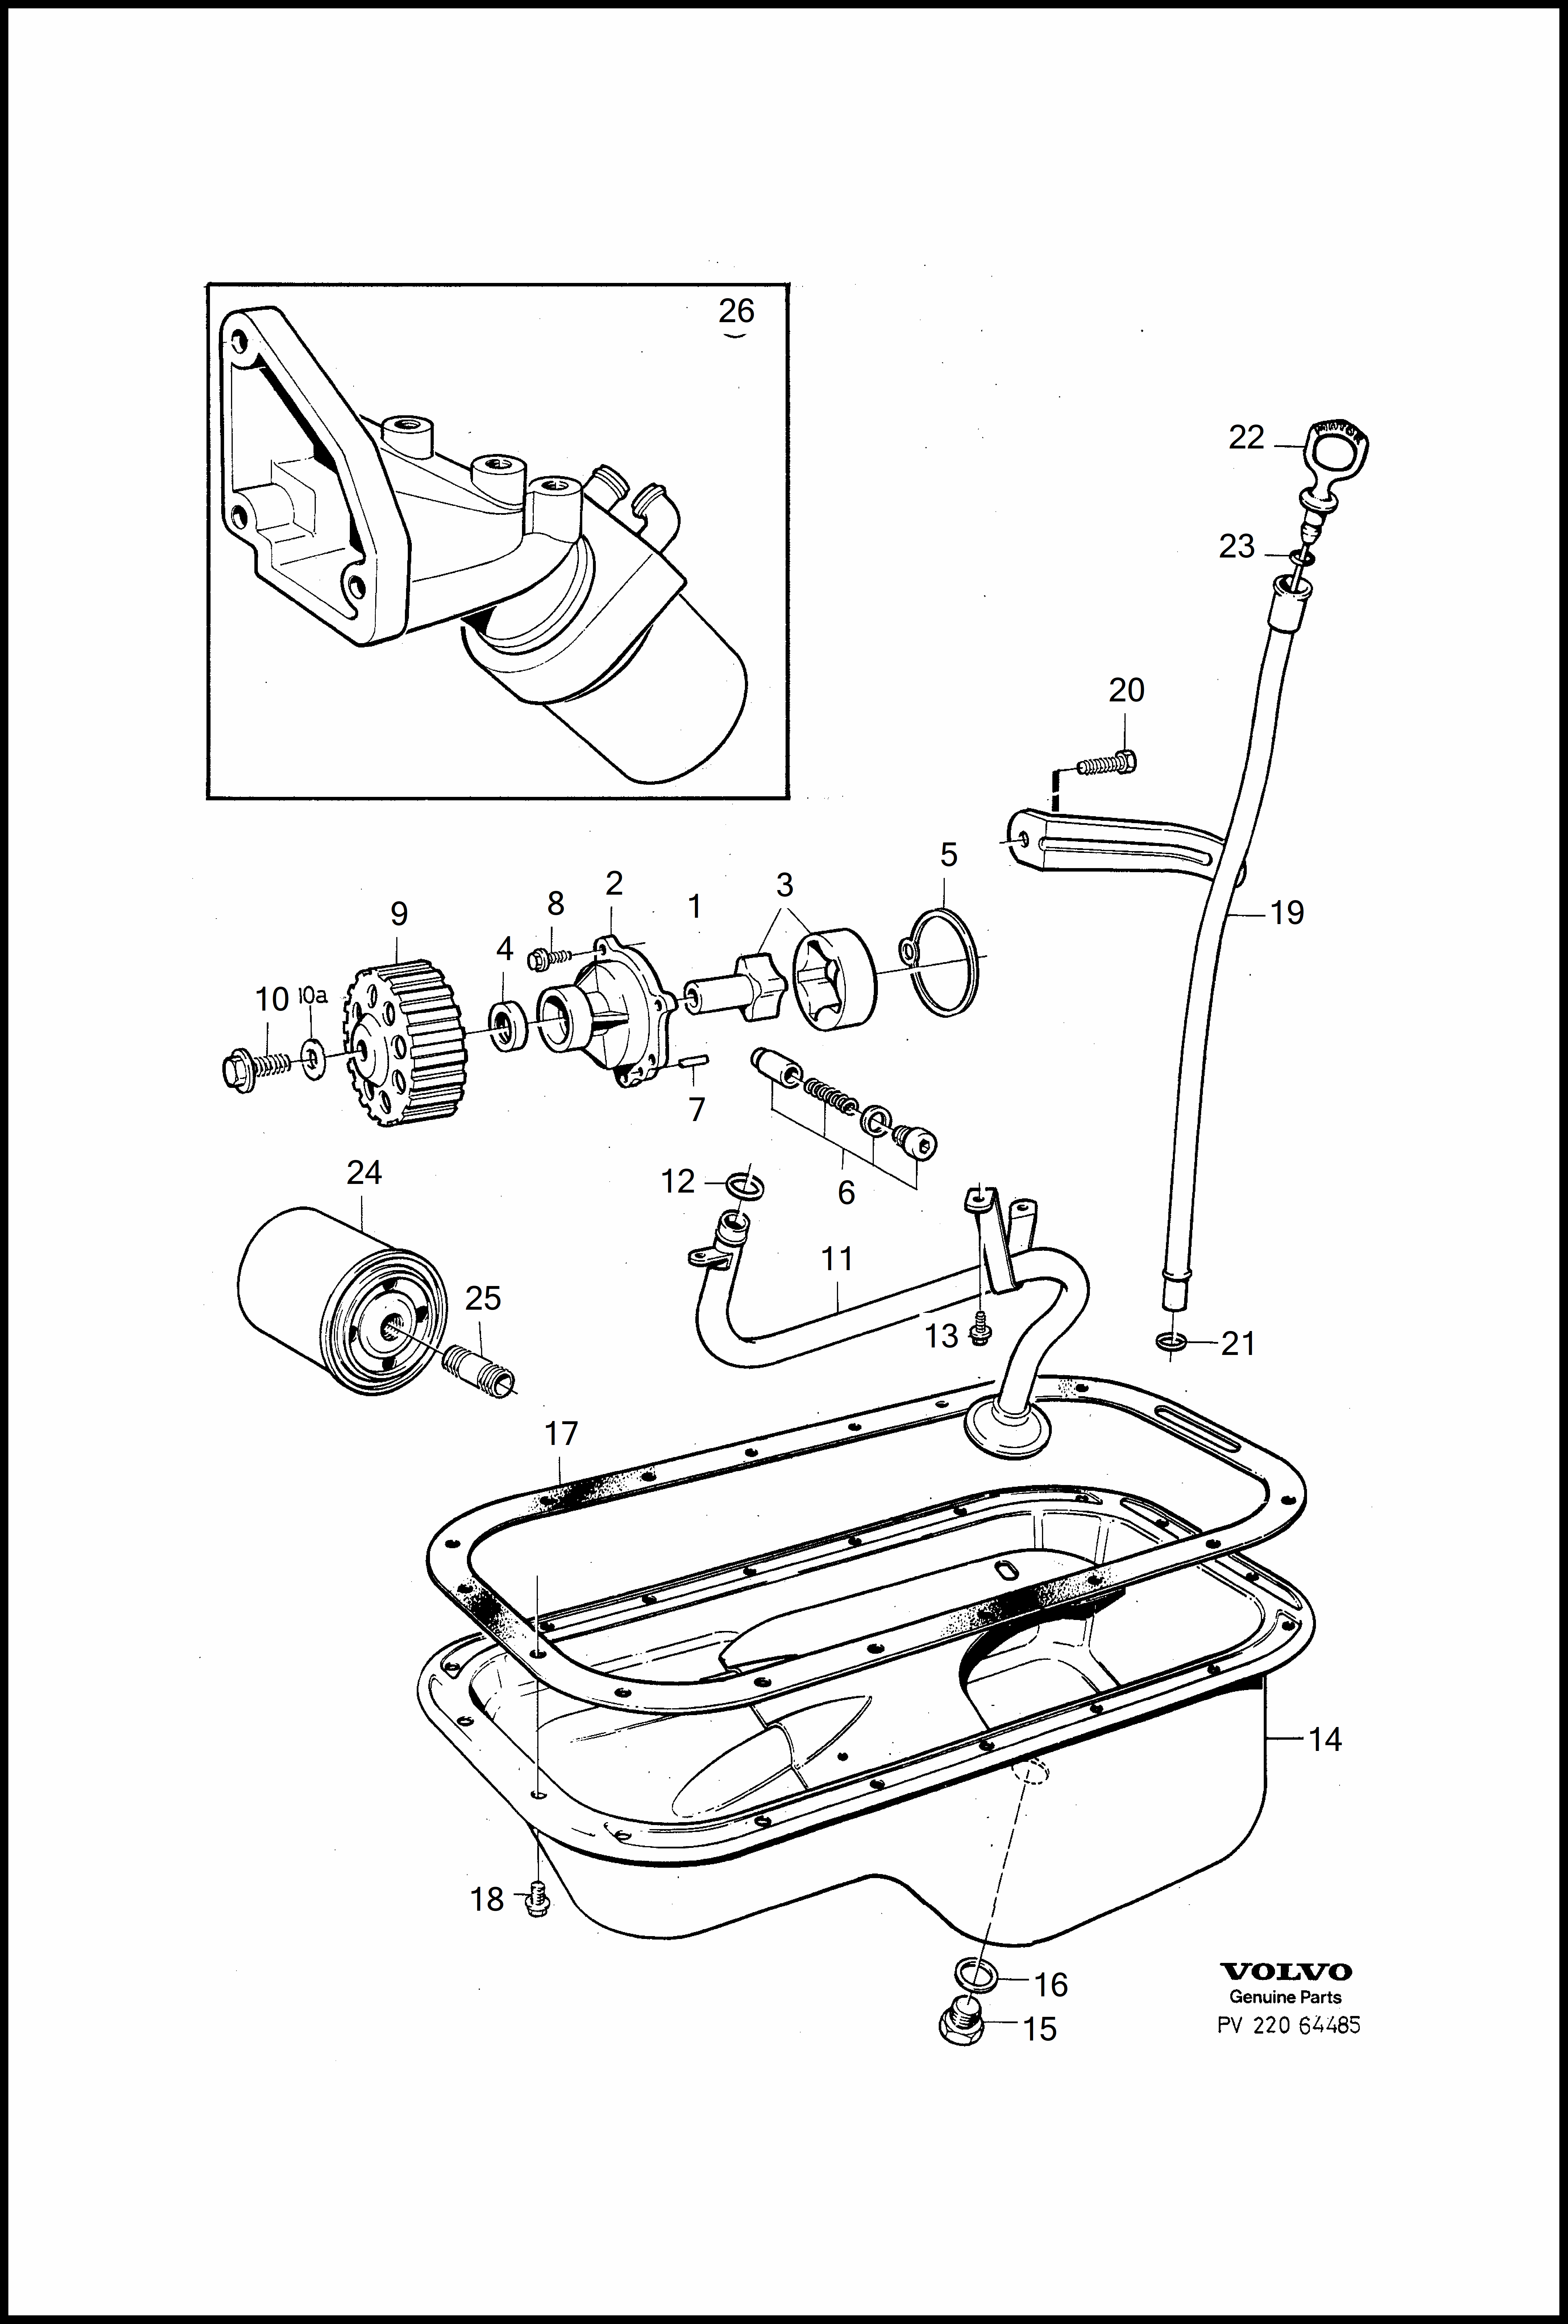 Lubricating system for Volvo 960 960